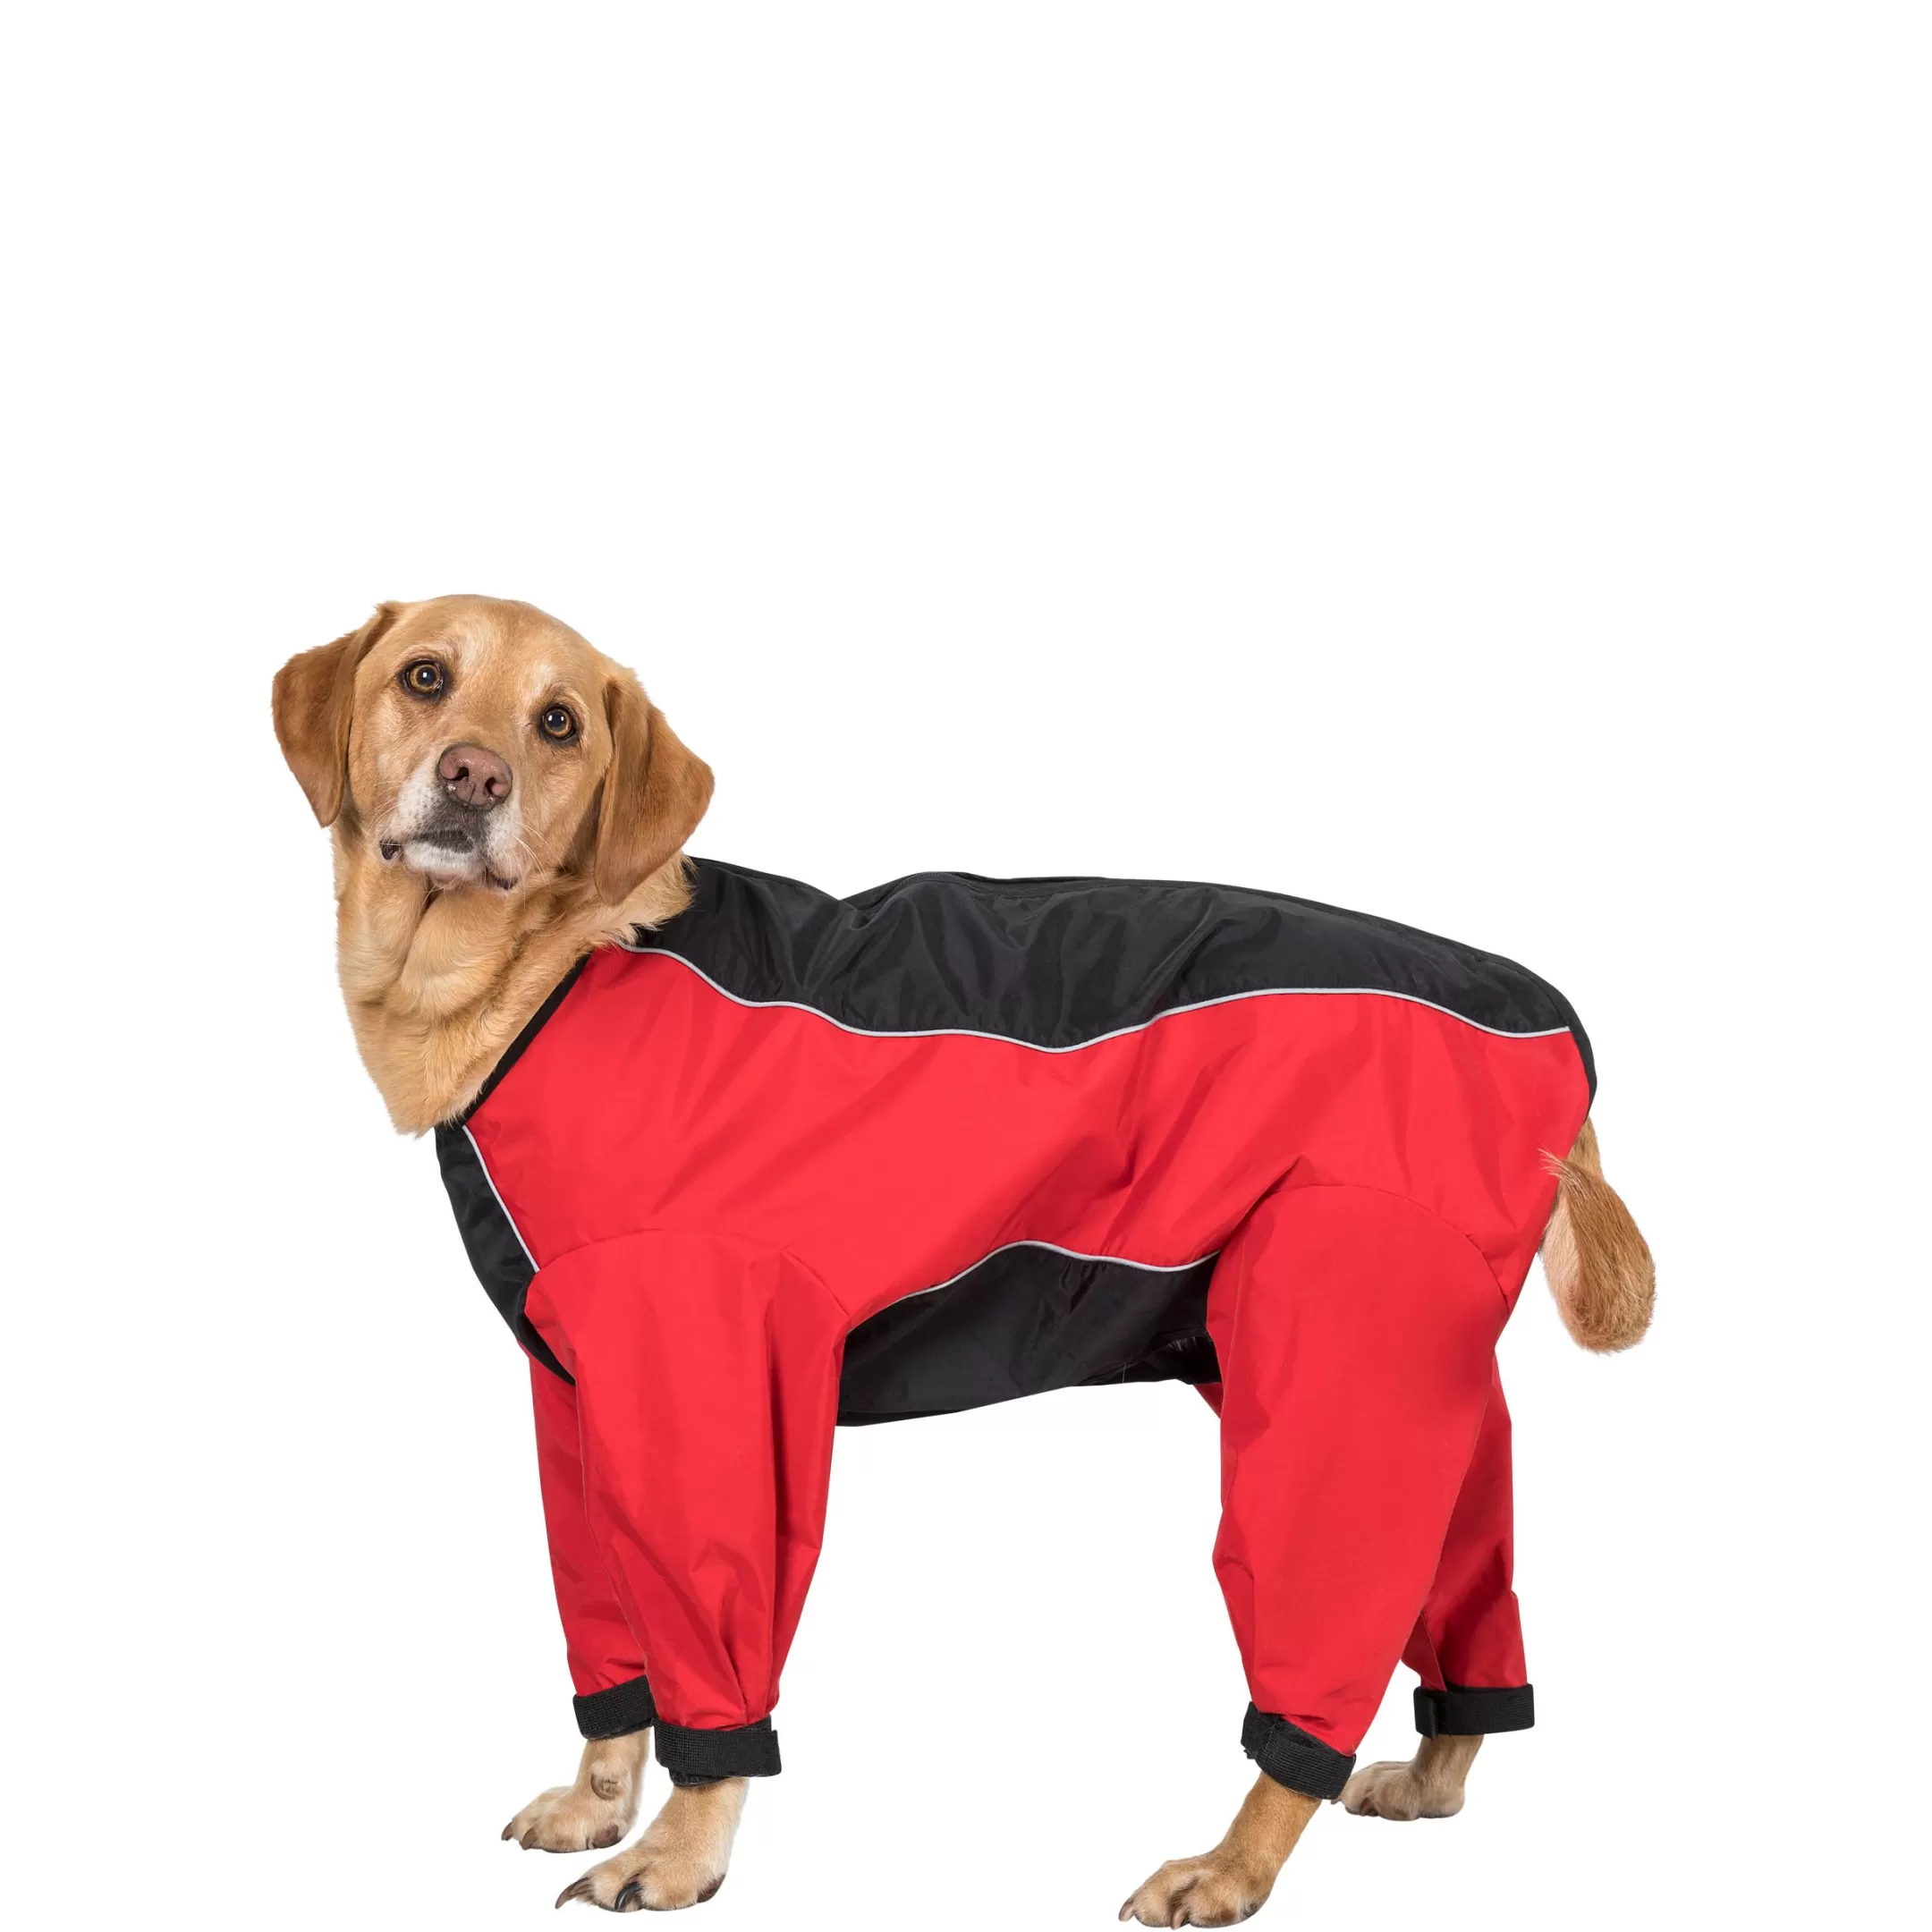 Trespaws Large Windproof Dog Coat with Leg Covers in Red Tia | Trespass Discount